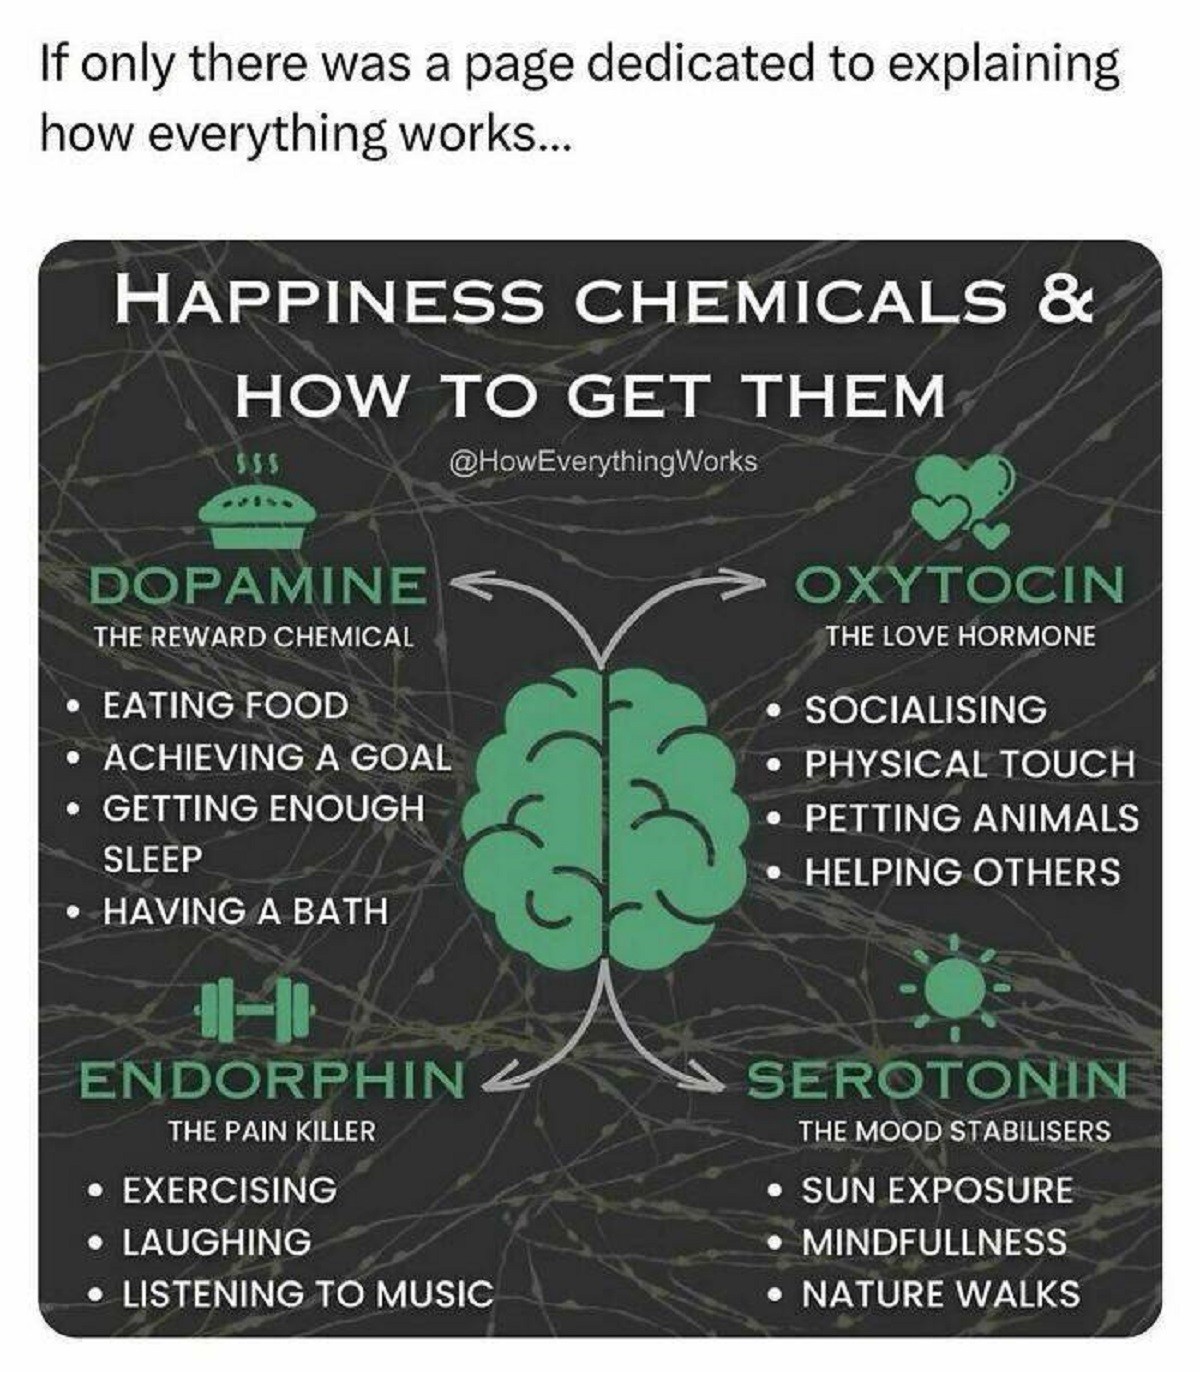 happiness chemicals and how to get them - If only there was a page dedicated to explaining how everything works... Happiness Chemicals & How To Get Them Works Dopamine The Reward Chemical Eating Food O Achieving A Goal Getting Enough Sleep Having A Bath O